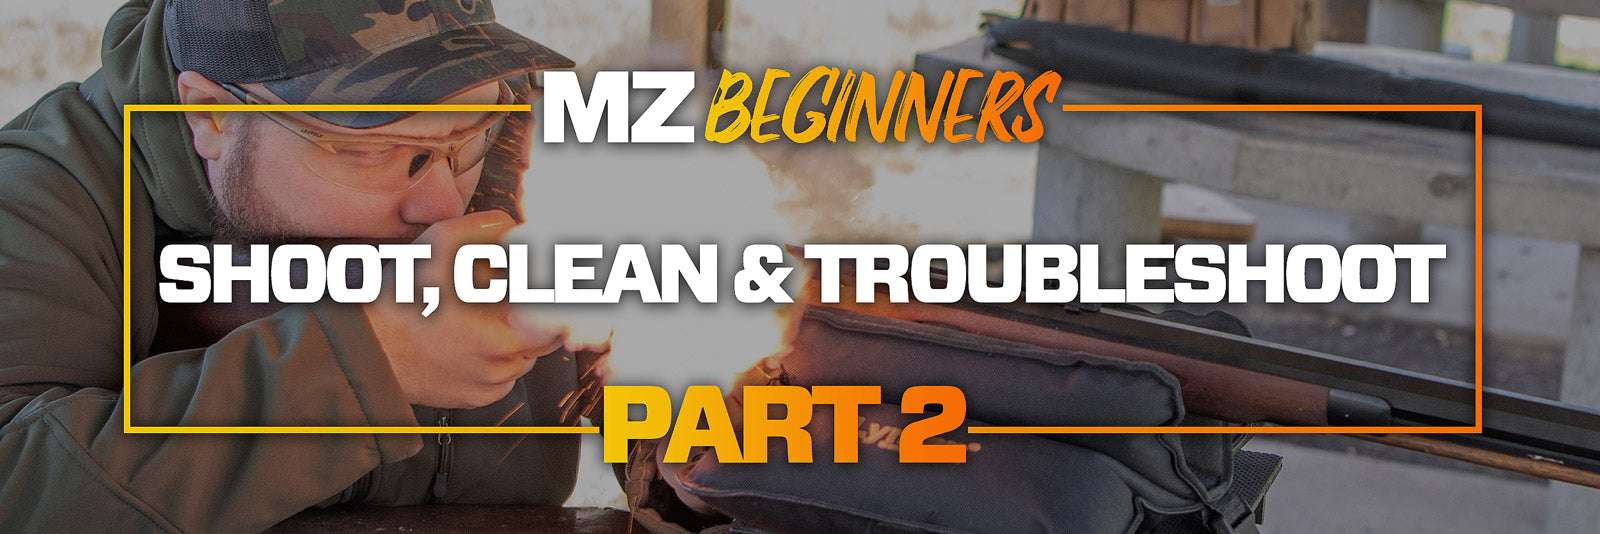 How To Shoot, Clean & Troubleshoot Your Muzzleloader - The Beginners Guide To Muzzleloading Series - Part 2